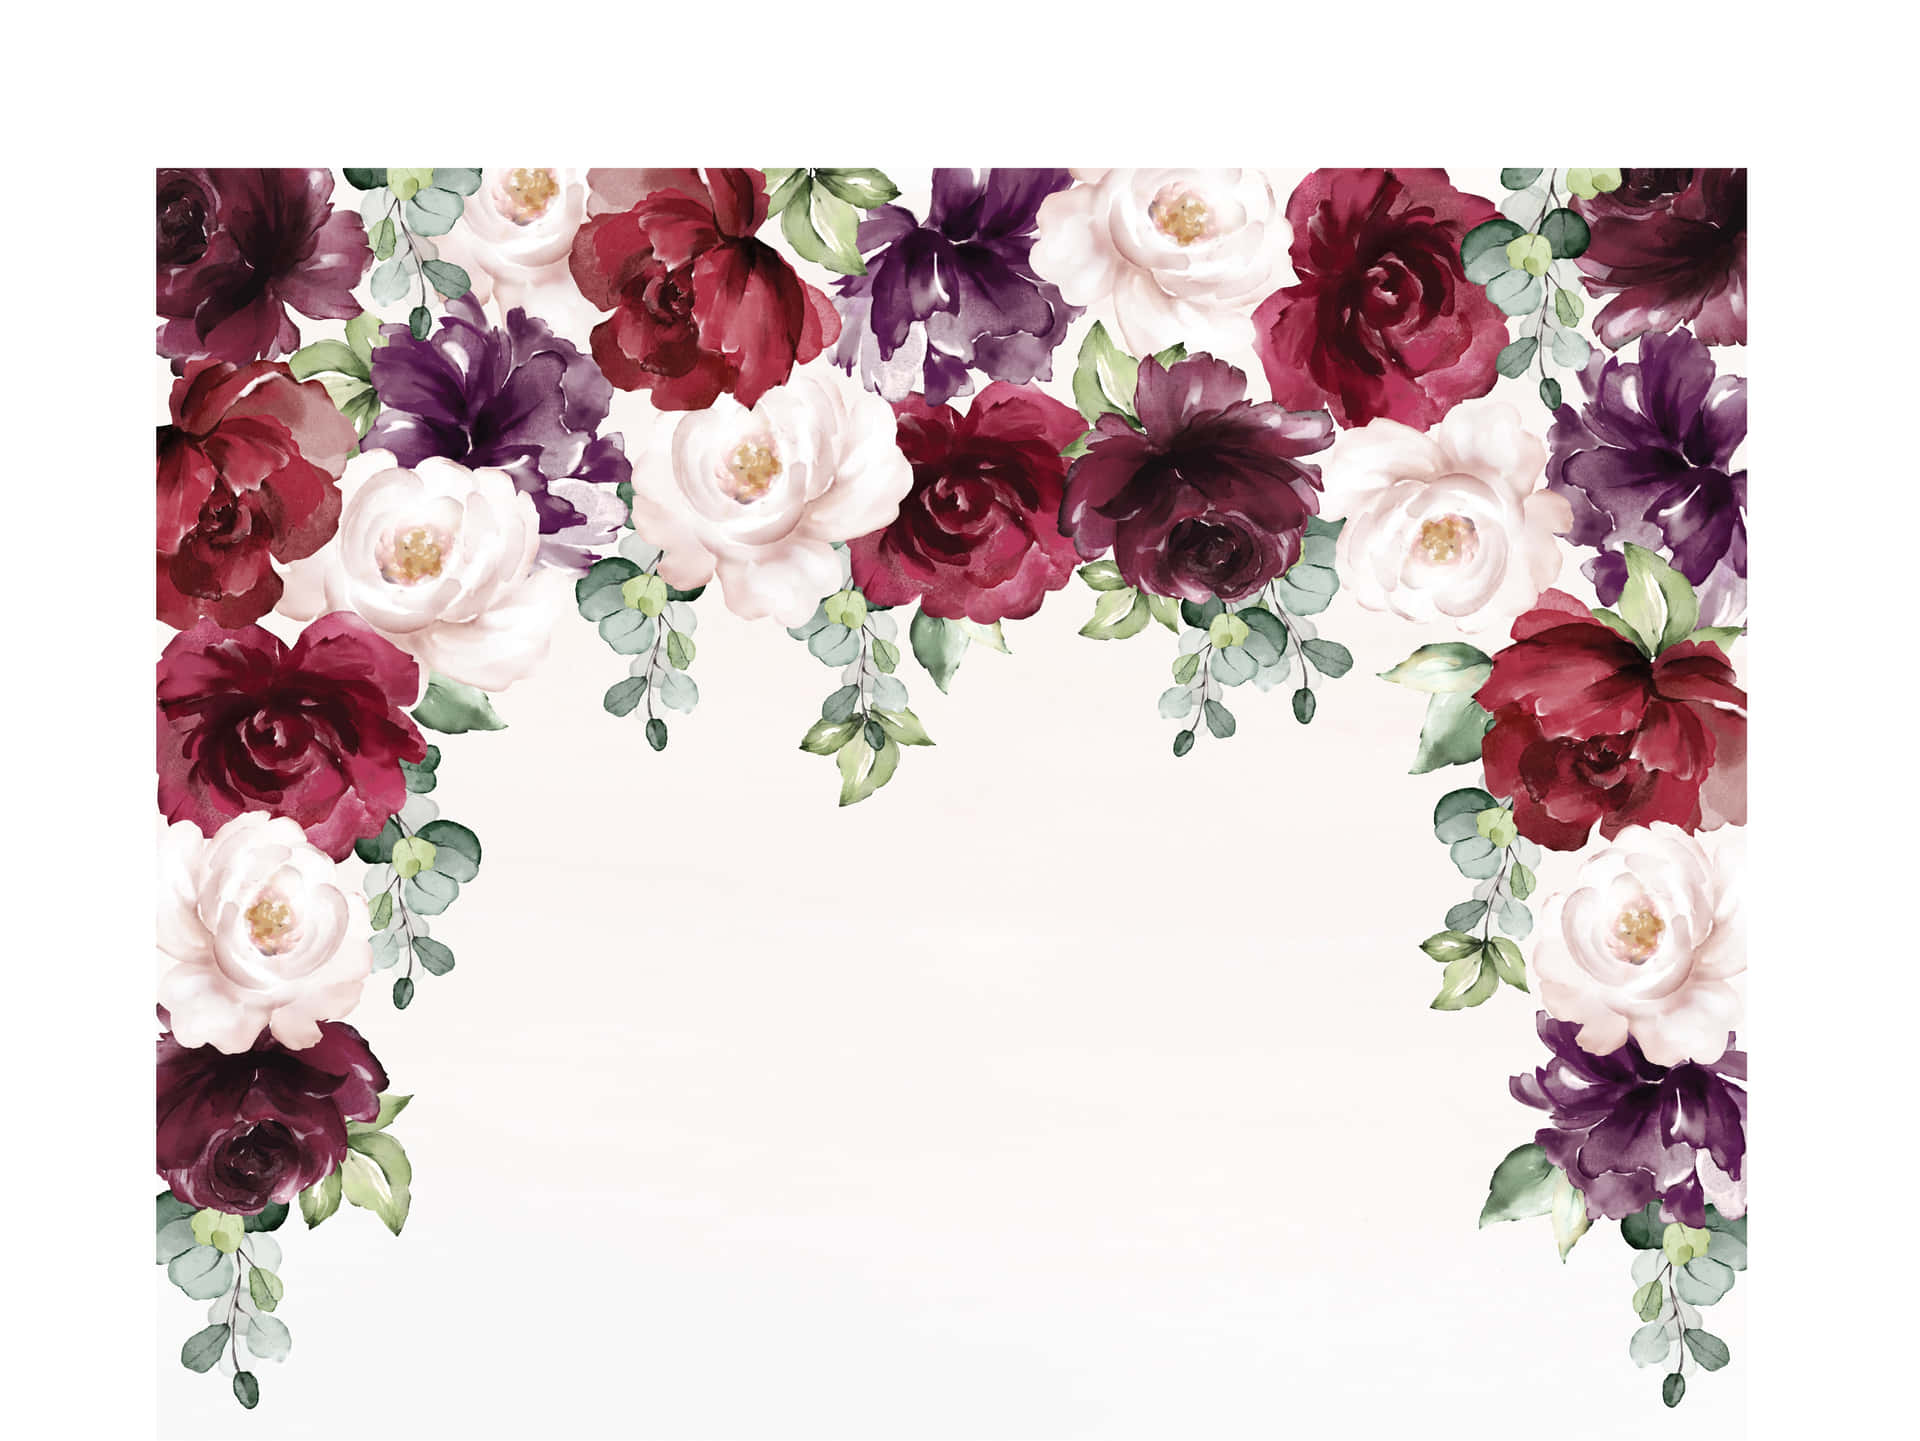 Download A Floral Background With Burgundy And White Flowers Wallpaper